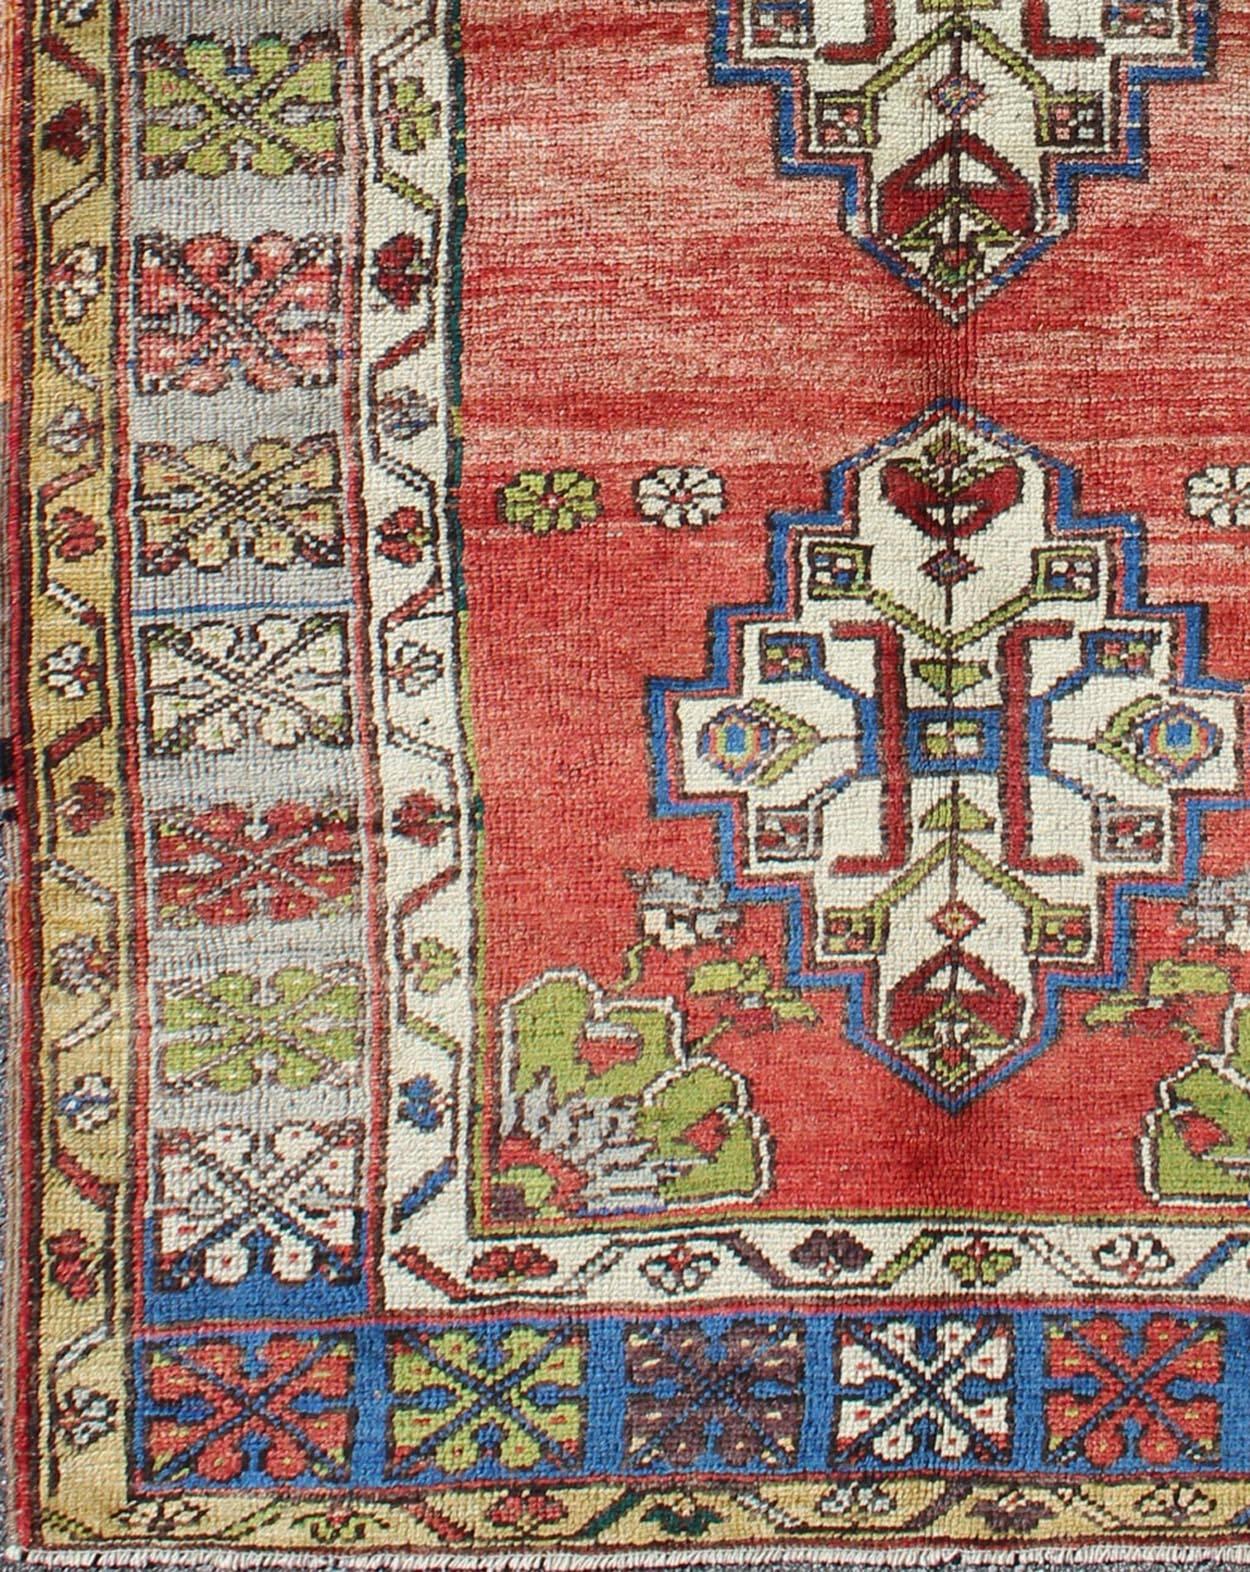 Green, blue and red vintage Turkish Oushak rug with three geometric medallions, rug en-183, country of origin / type: Turkey / Oushak, circa 1940.

This vintage Turkish Oushak gallery rug (circa mid-20th century) features a unique blend of colors